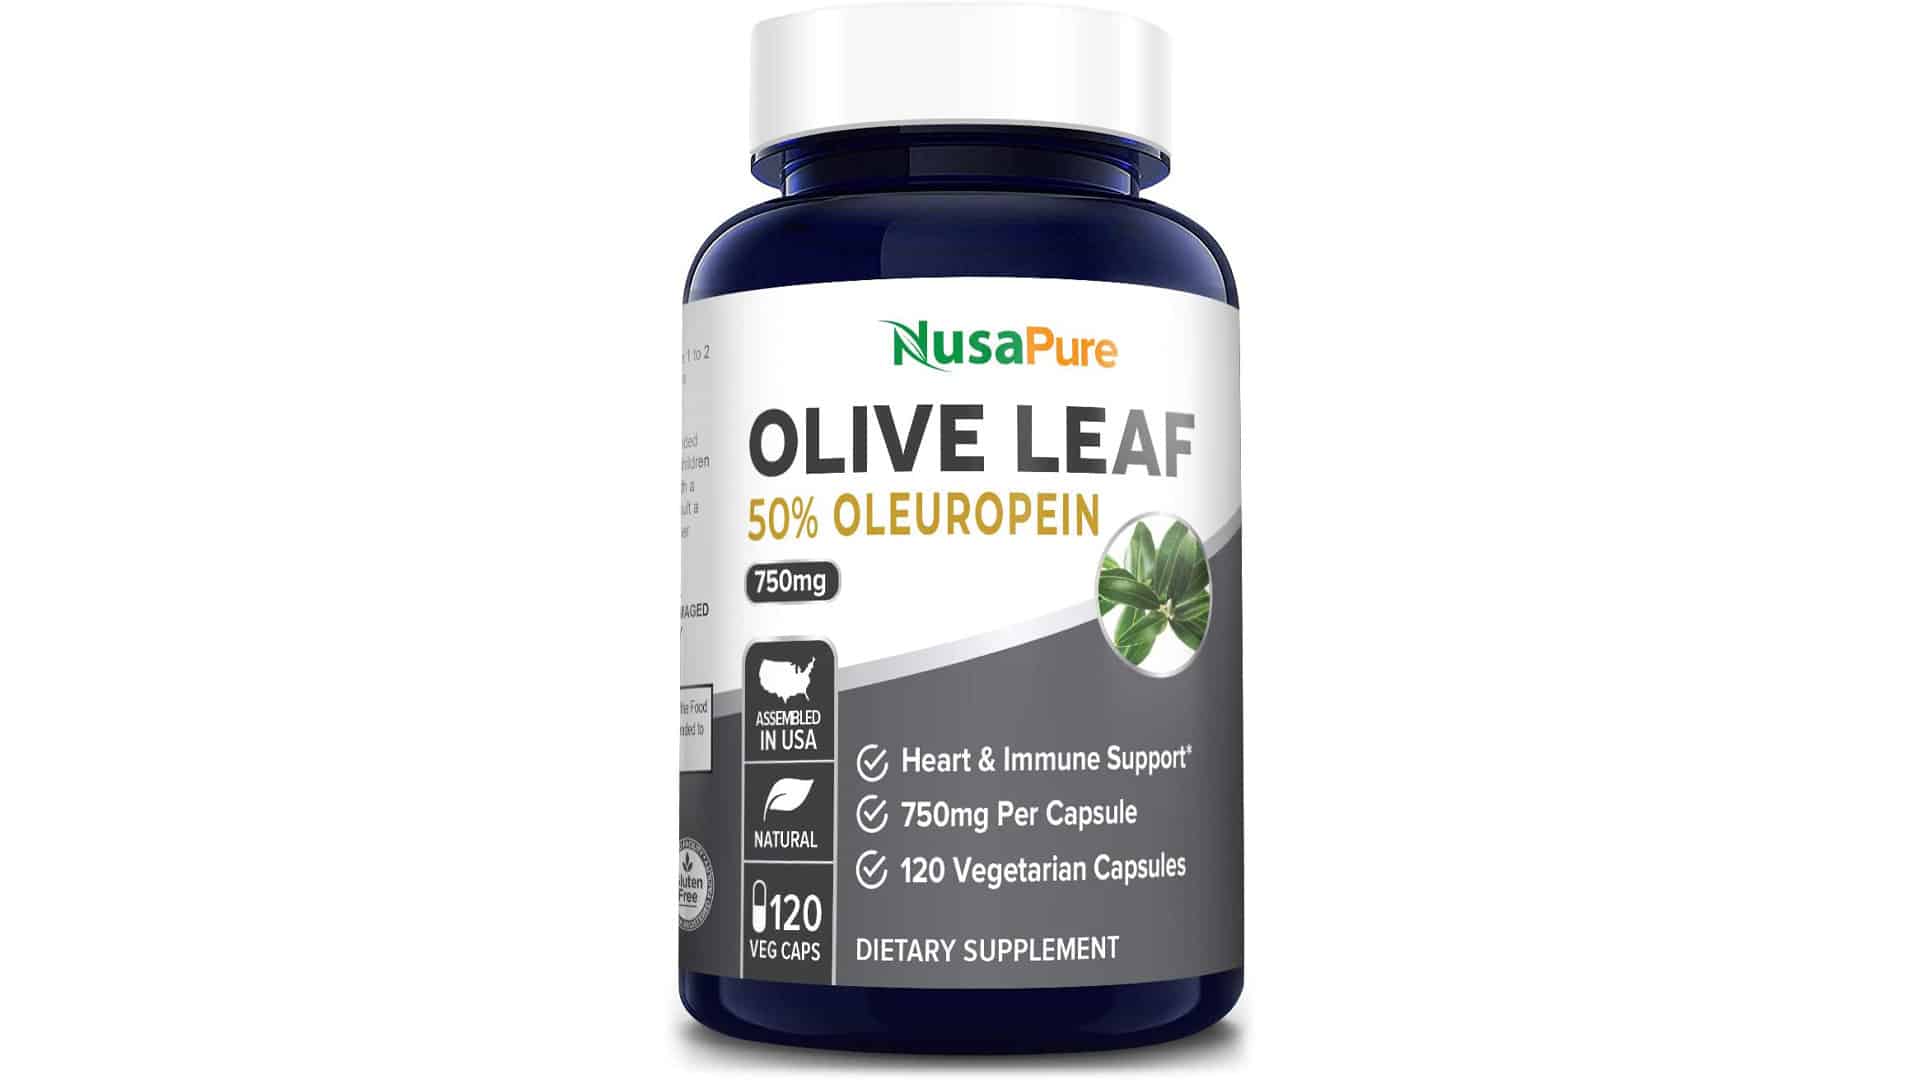 "Olive Leaf Extract